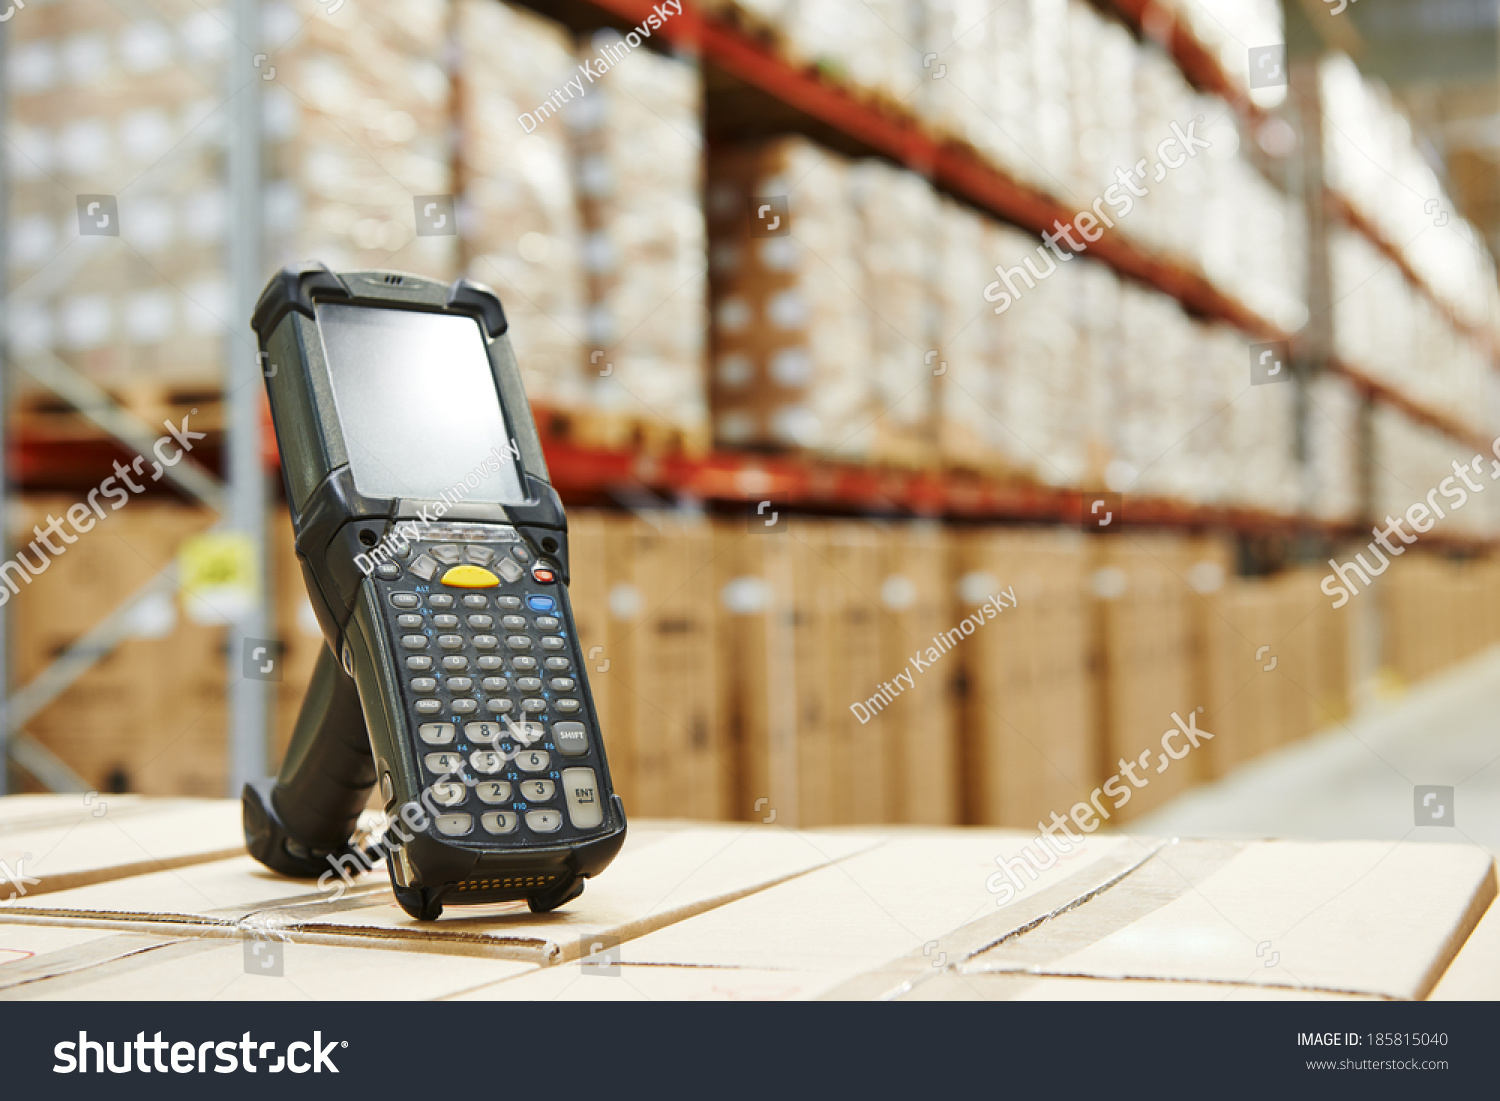 Bluetooth barcode scanner in front of modern warehouse #185815040